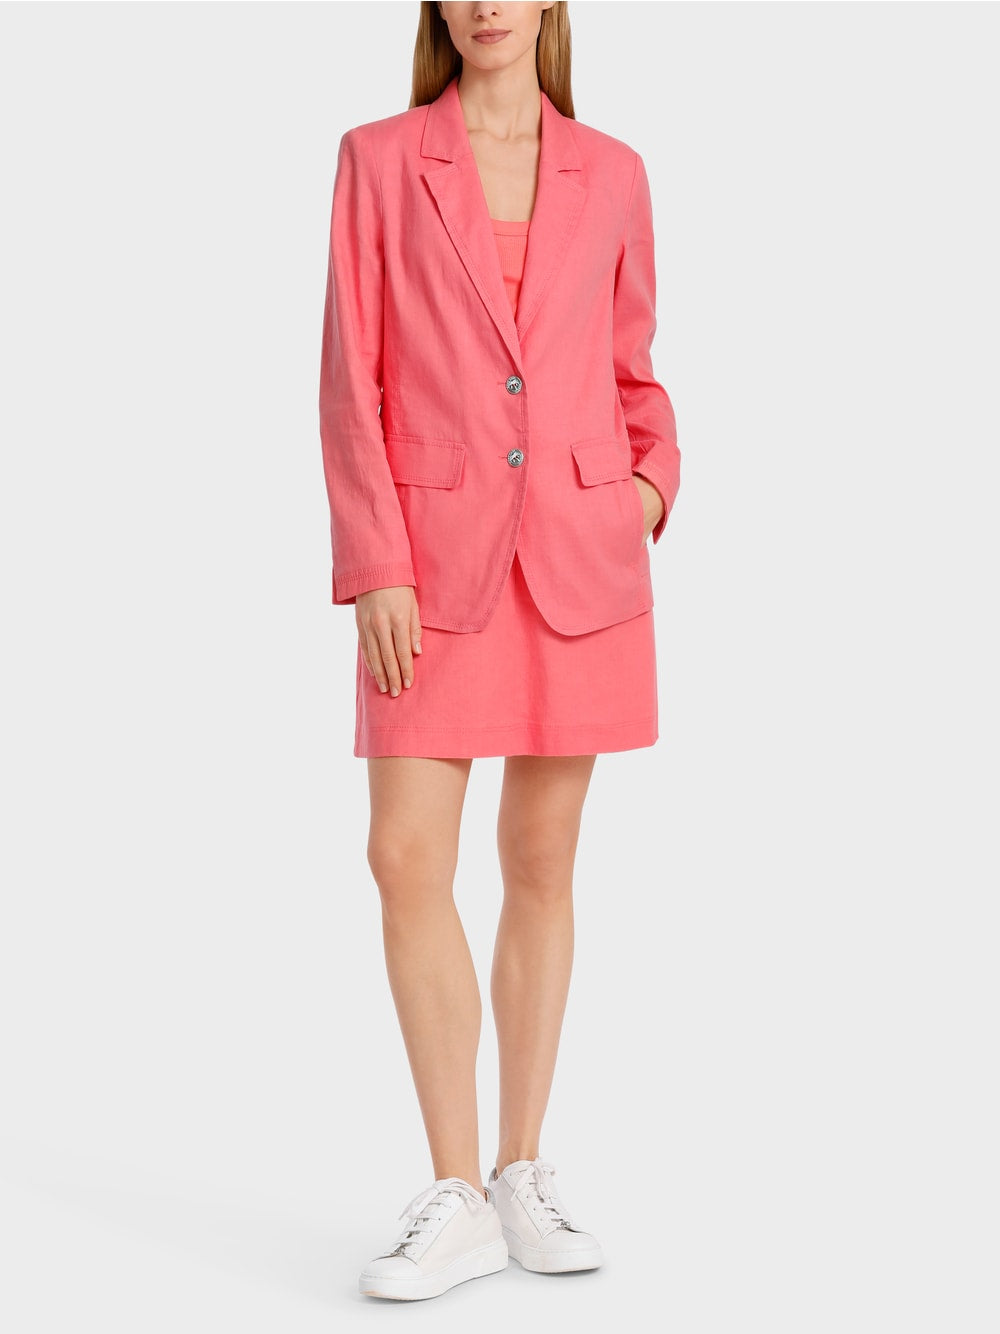 Marc Cain Sports Blazer with a Creased Look WS34.12W03 Light Neon Red